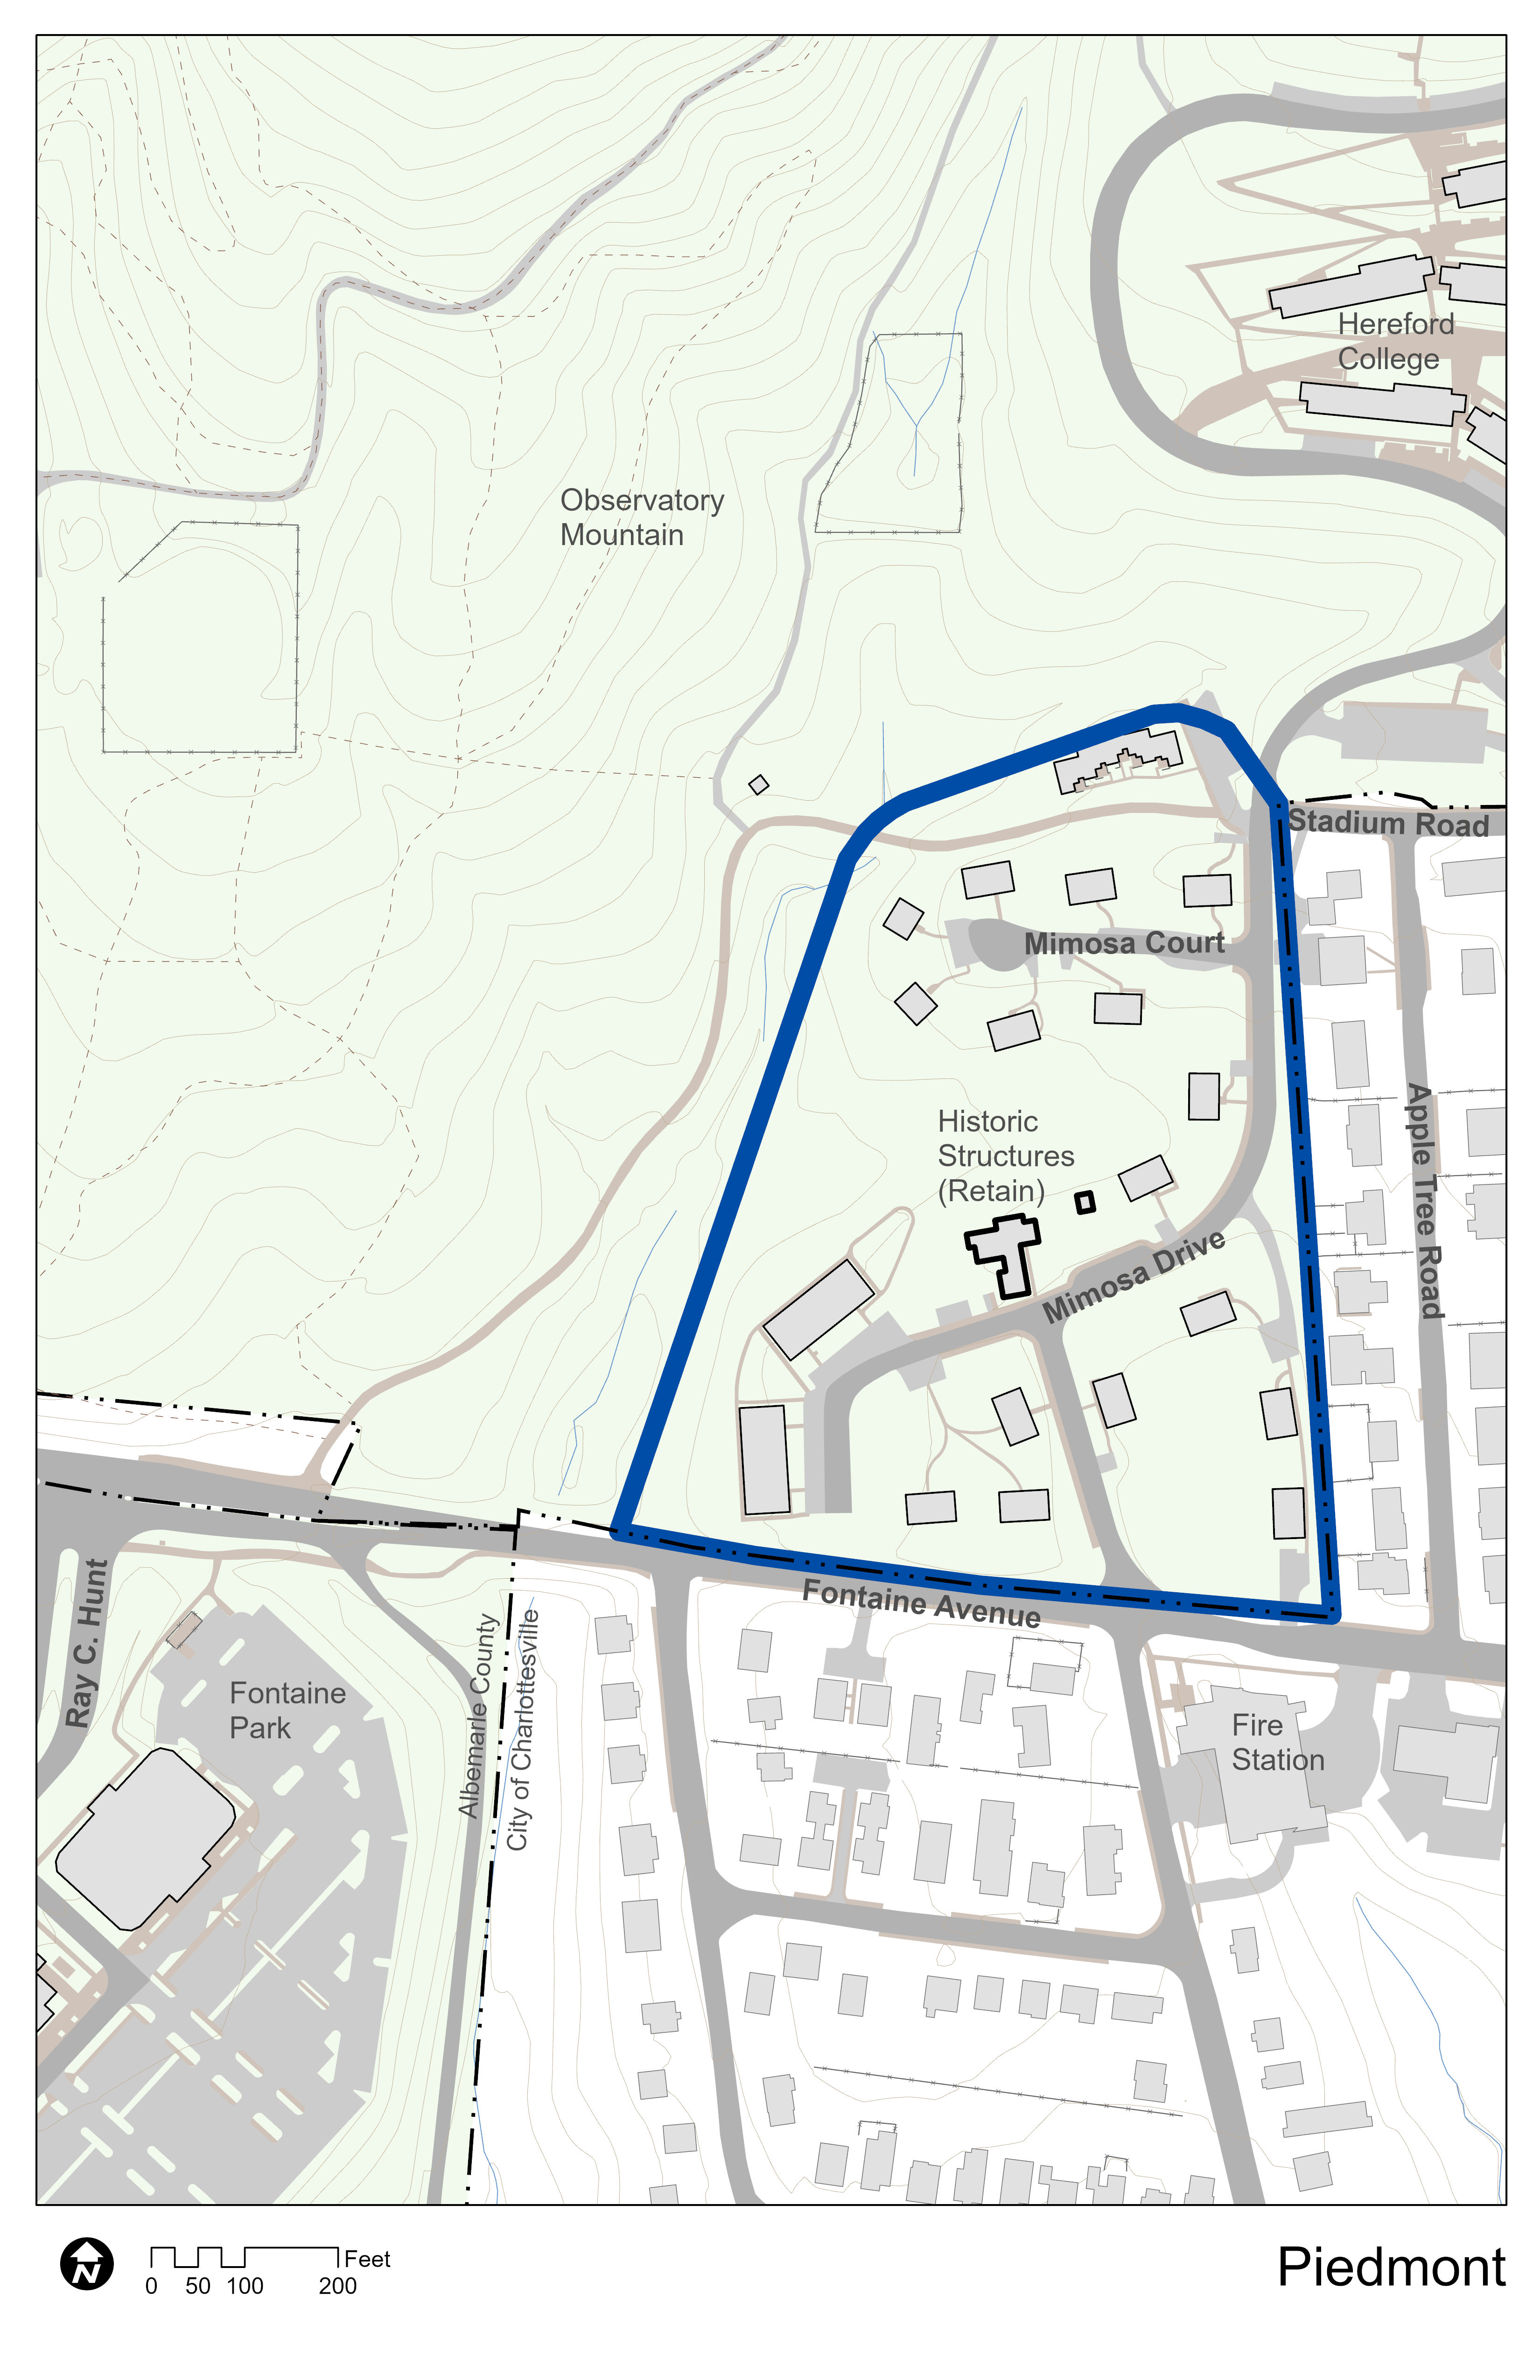 map of Piedmont site with labels